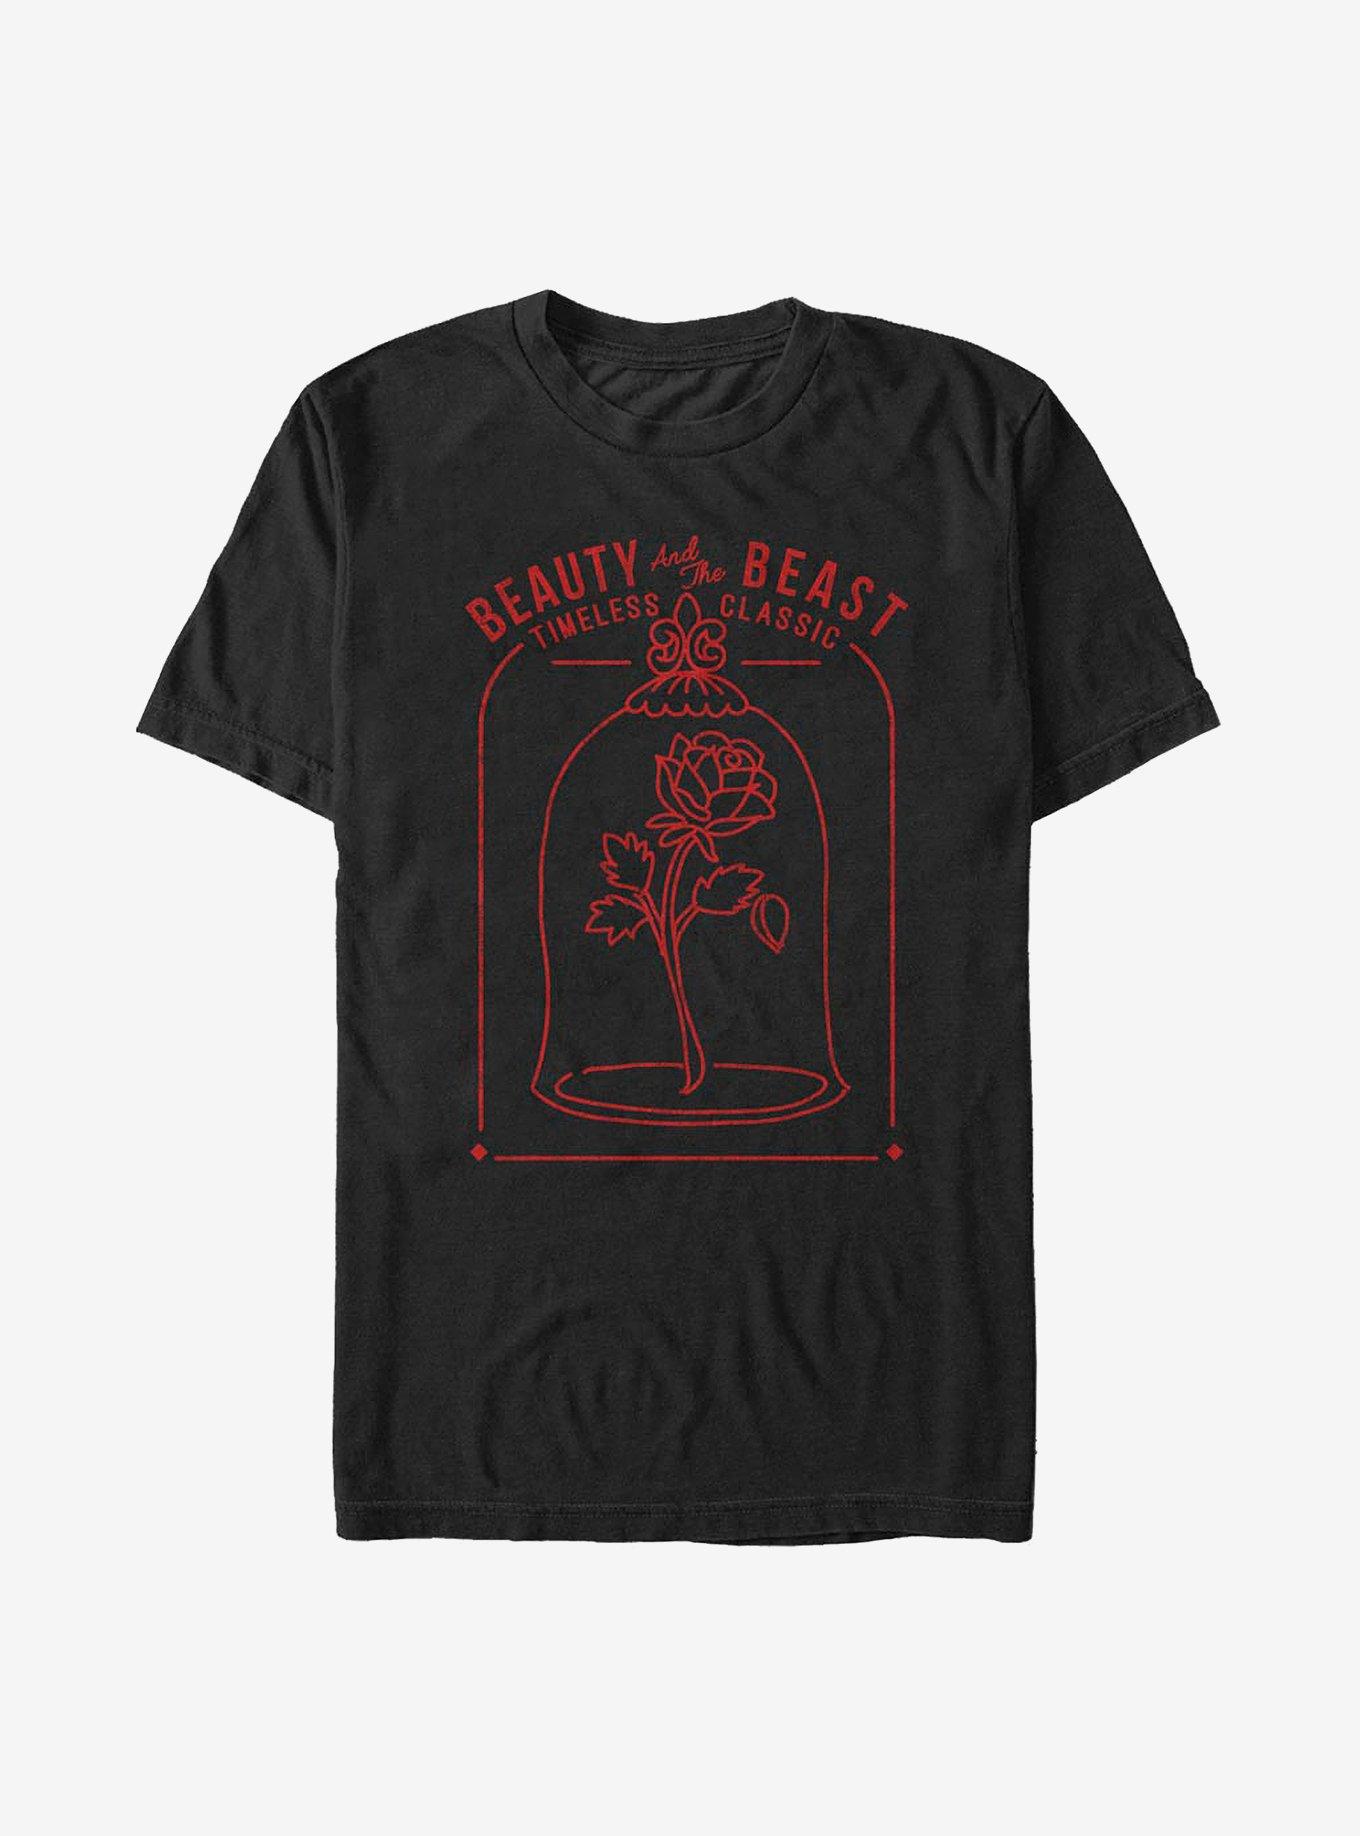 Disney Beauty And The Beast Old Tales T-Shirt, BLACK, hi-res